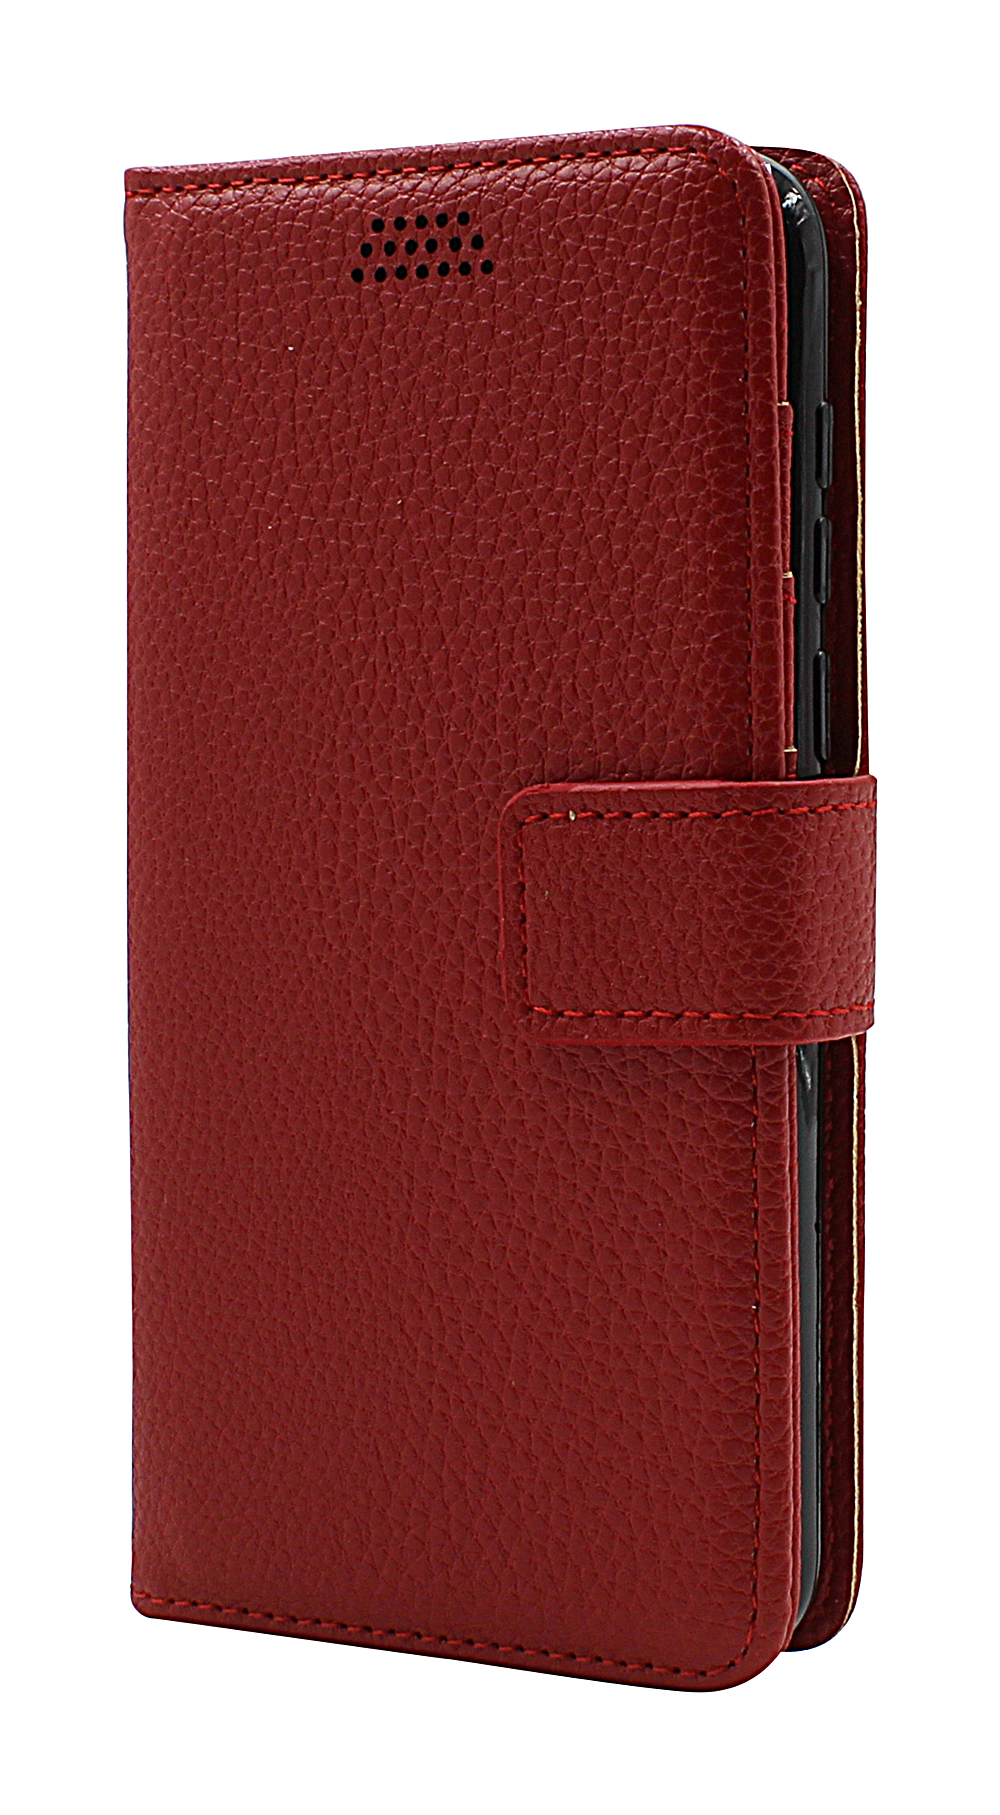 New Standcase Wallet Huawei Y5p